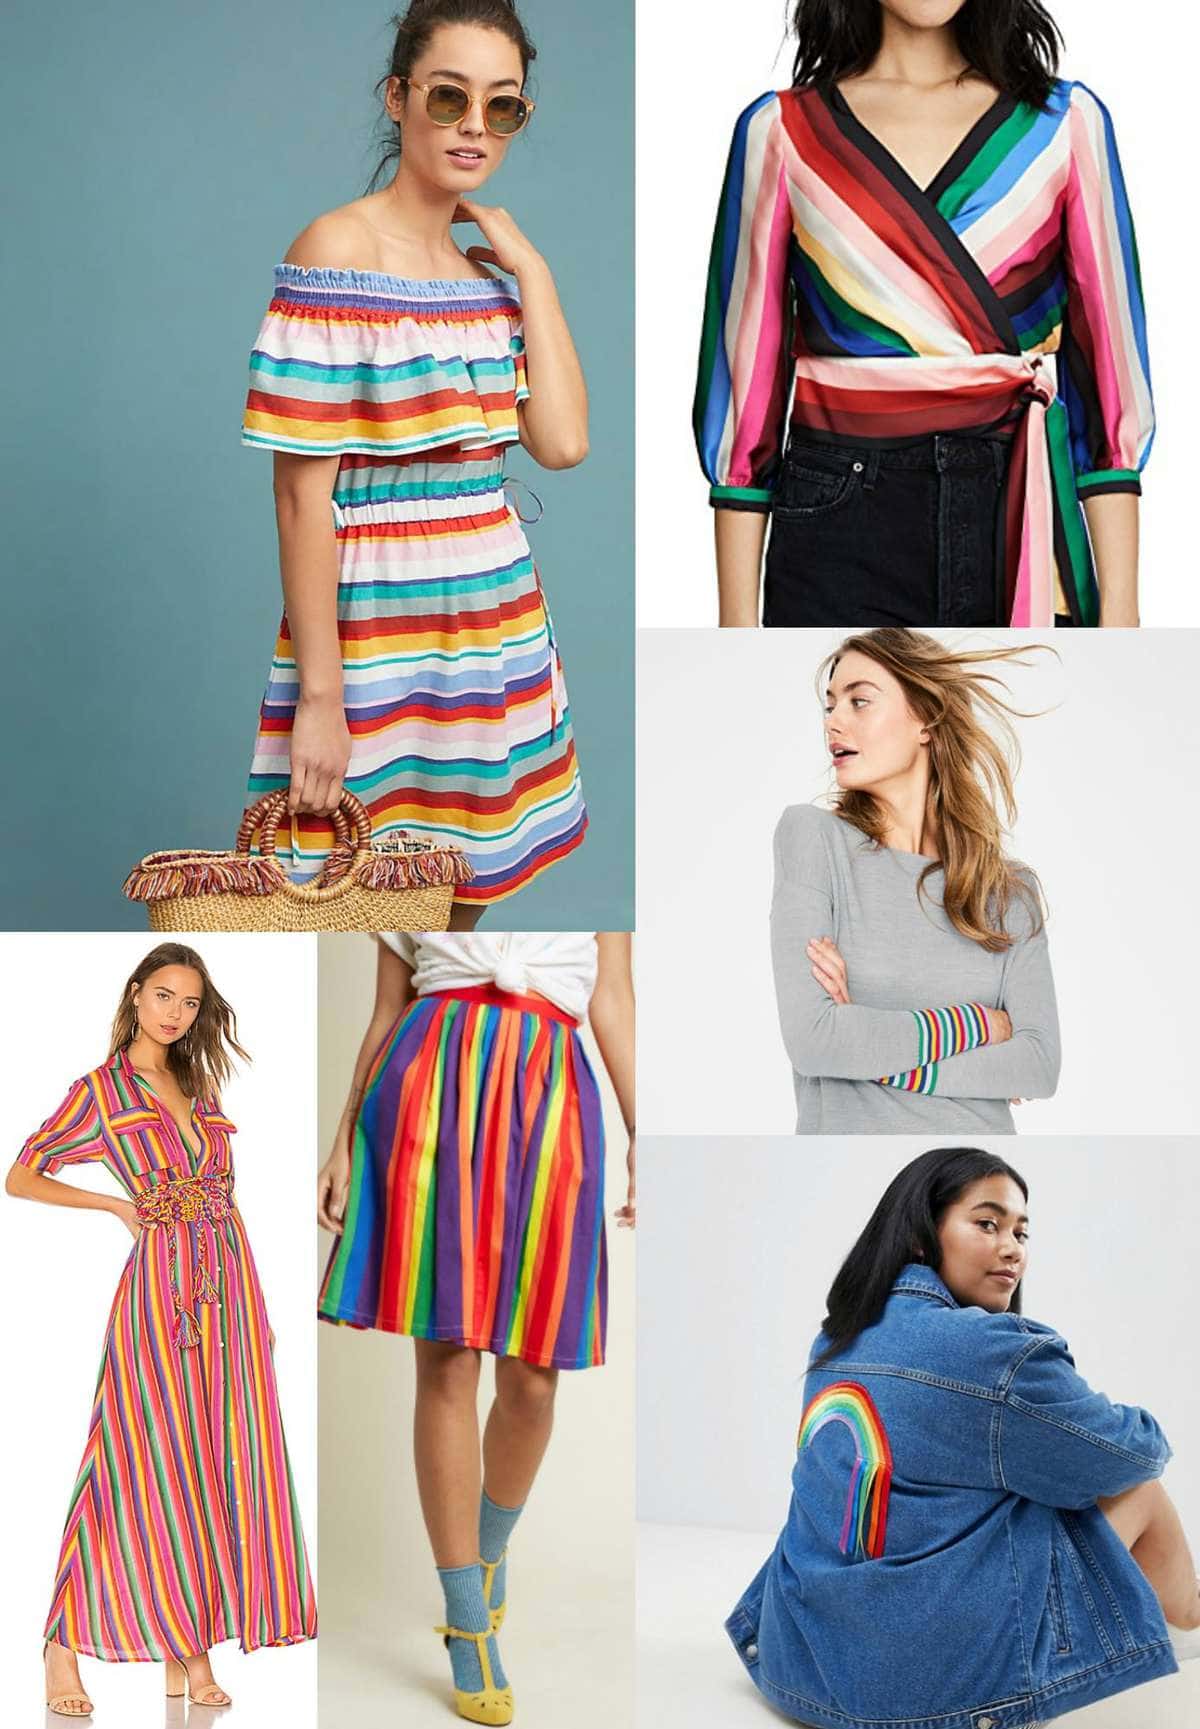 The rainbow fashion trend for 2018 - incorporate it into your wardrobe with a handbag full of color and high on style featured by popular DC petite fashion blogger, Wardrobe Oxygen